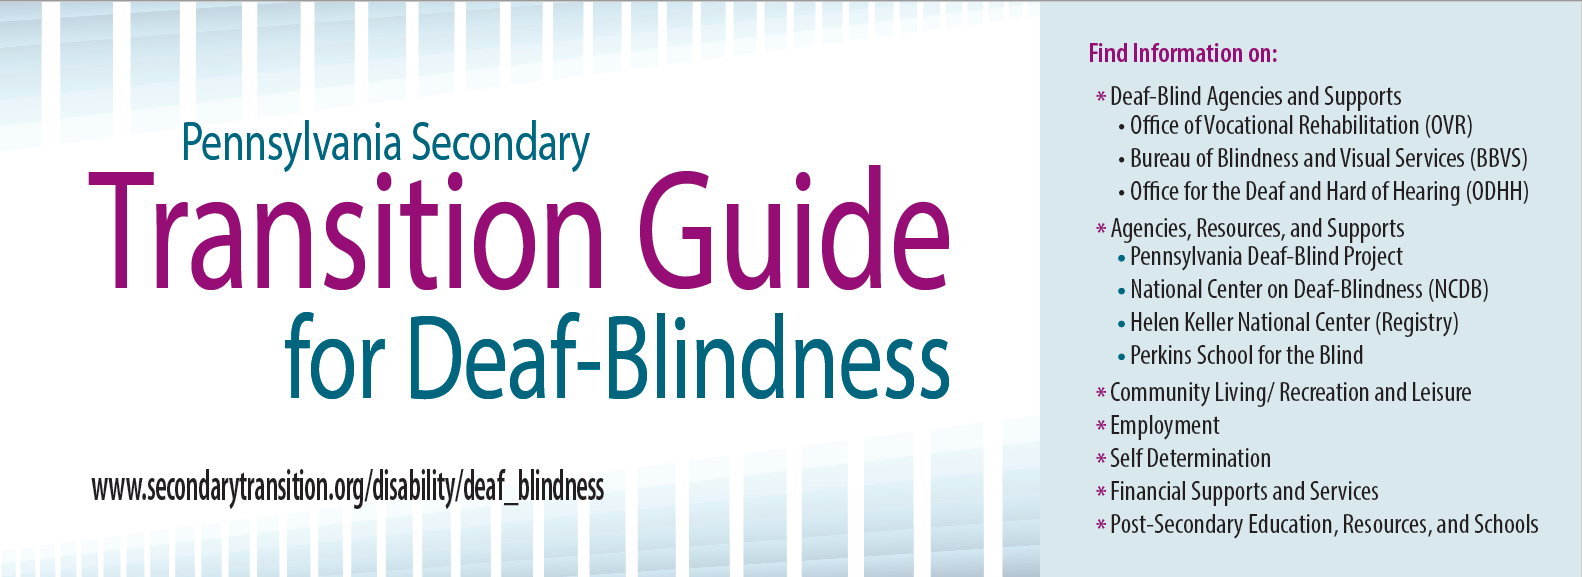 Secondary Transition Guide for Deaf-Blindness